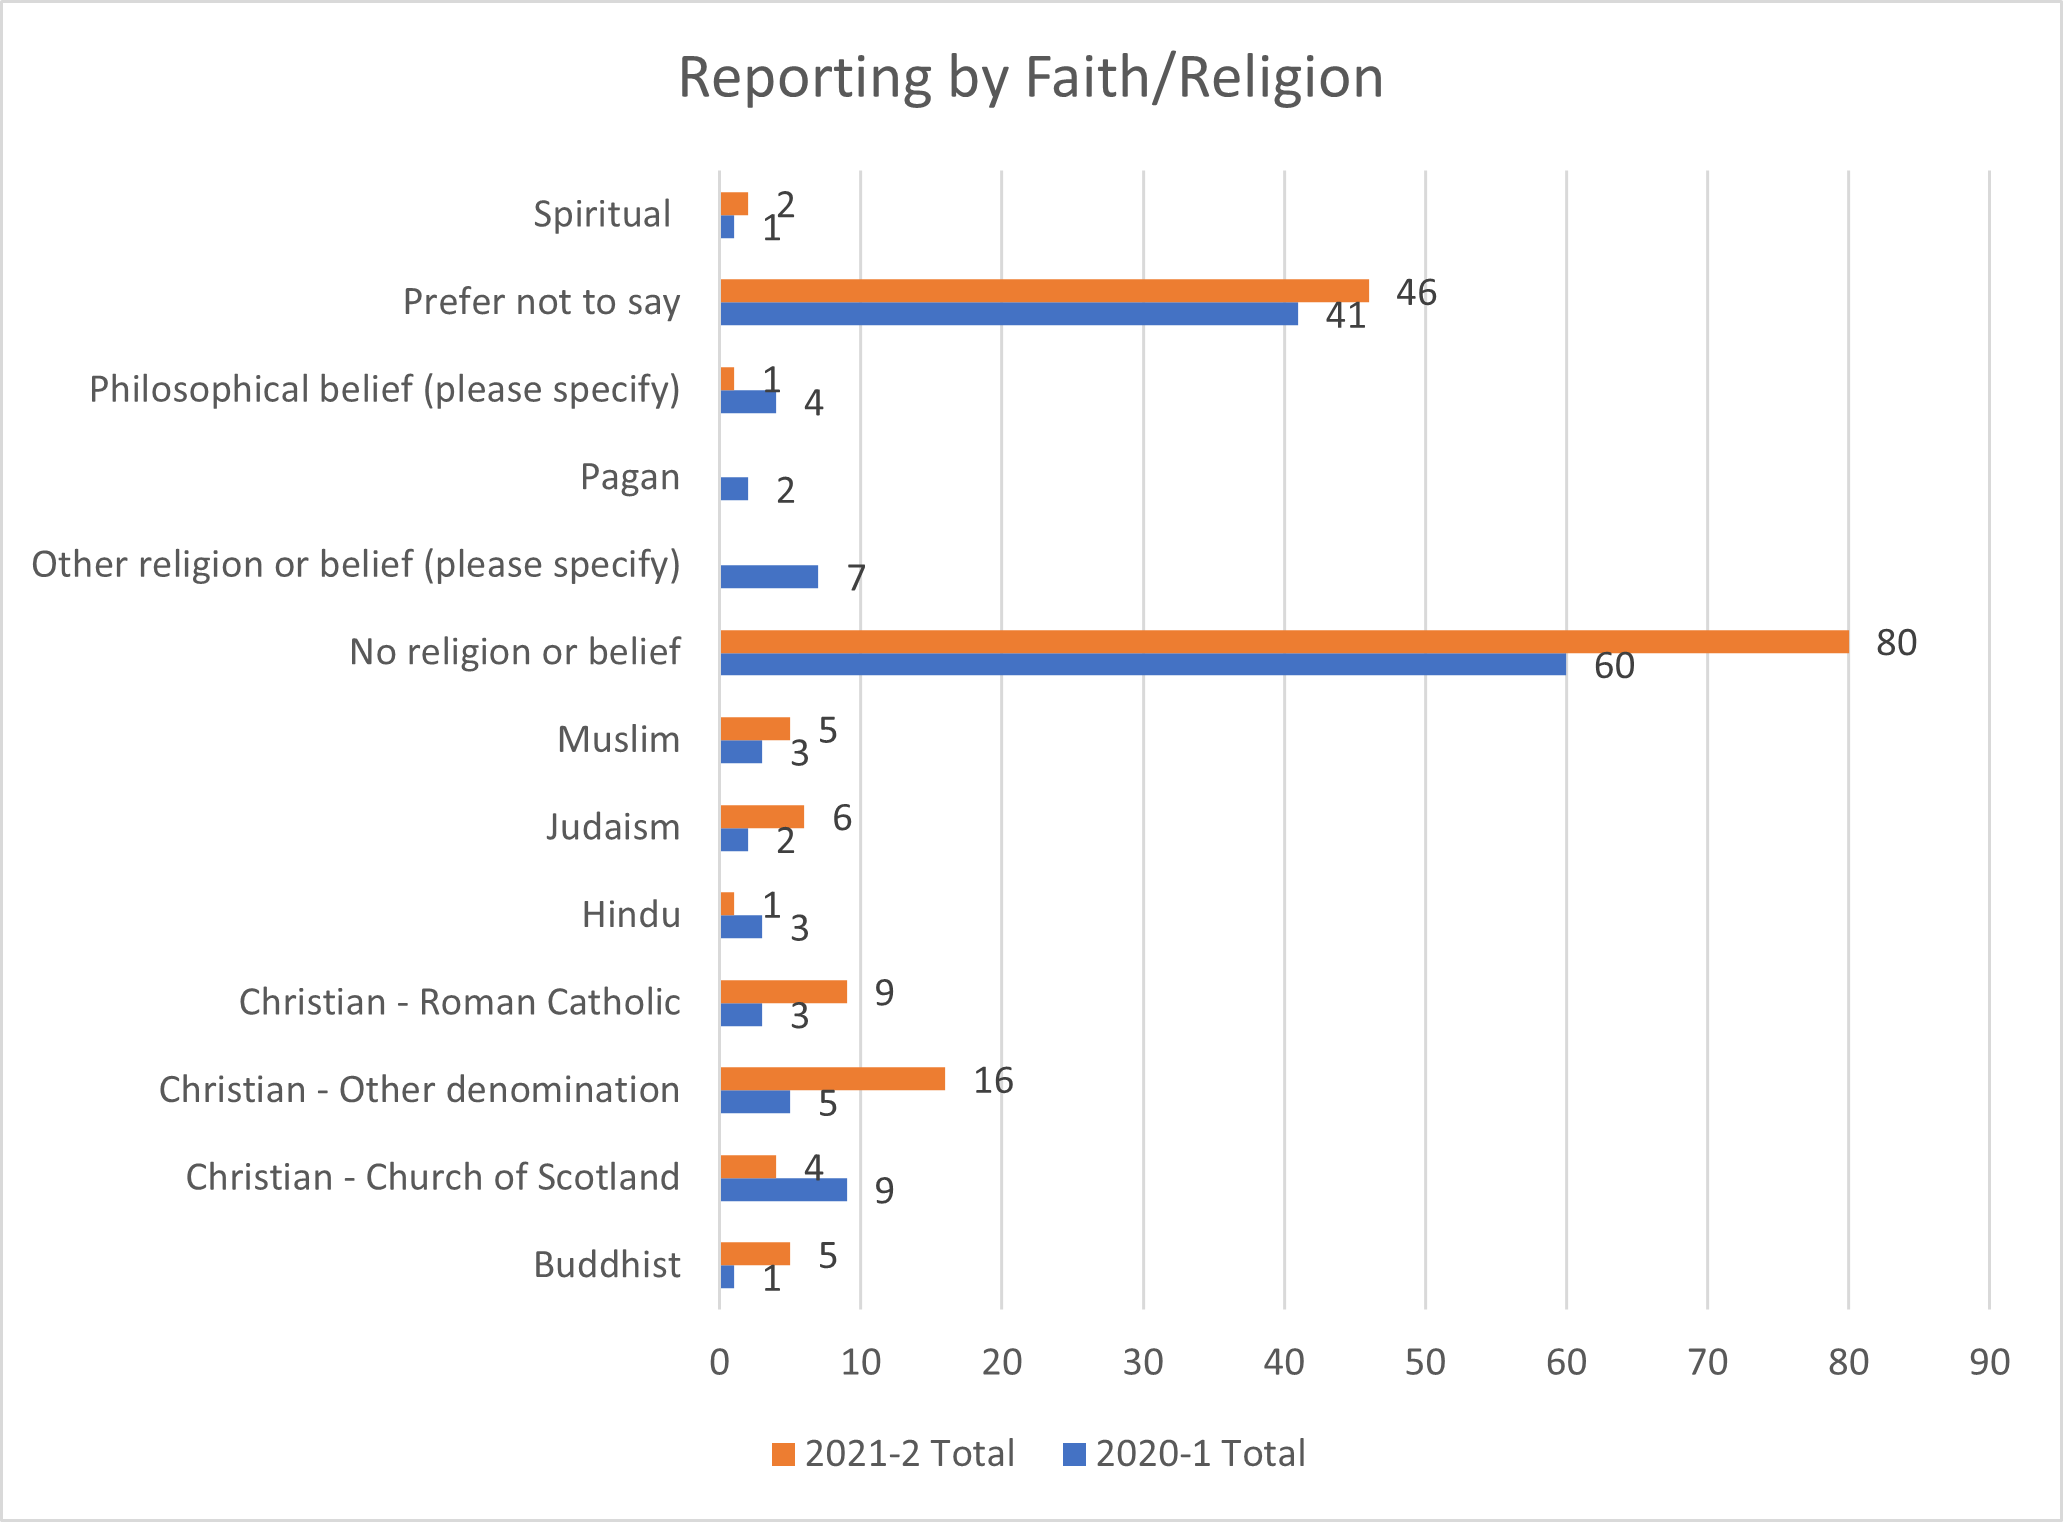 Reporting by faith and religion